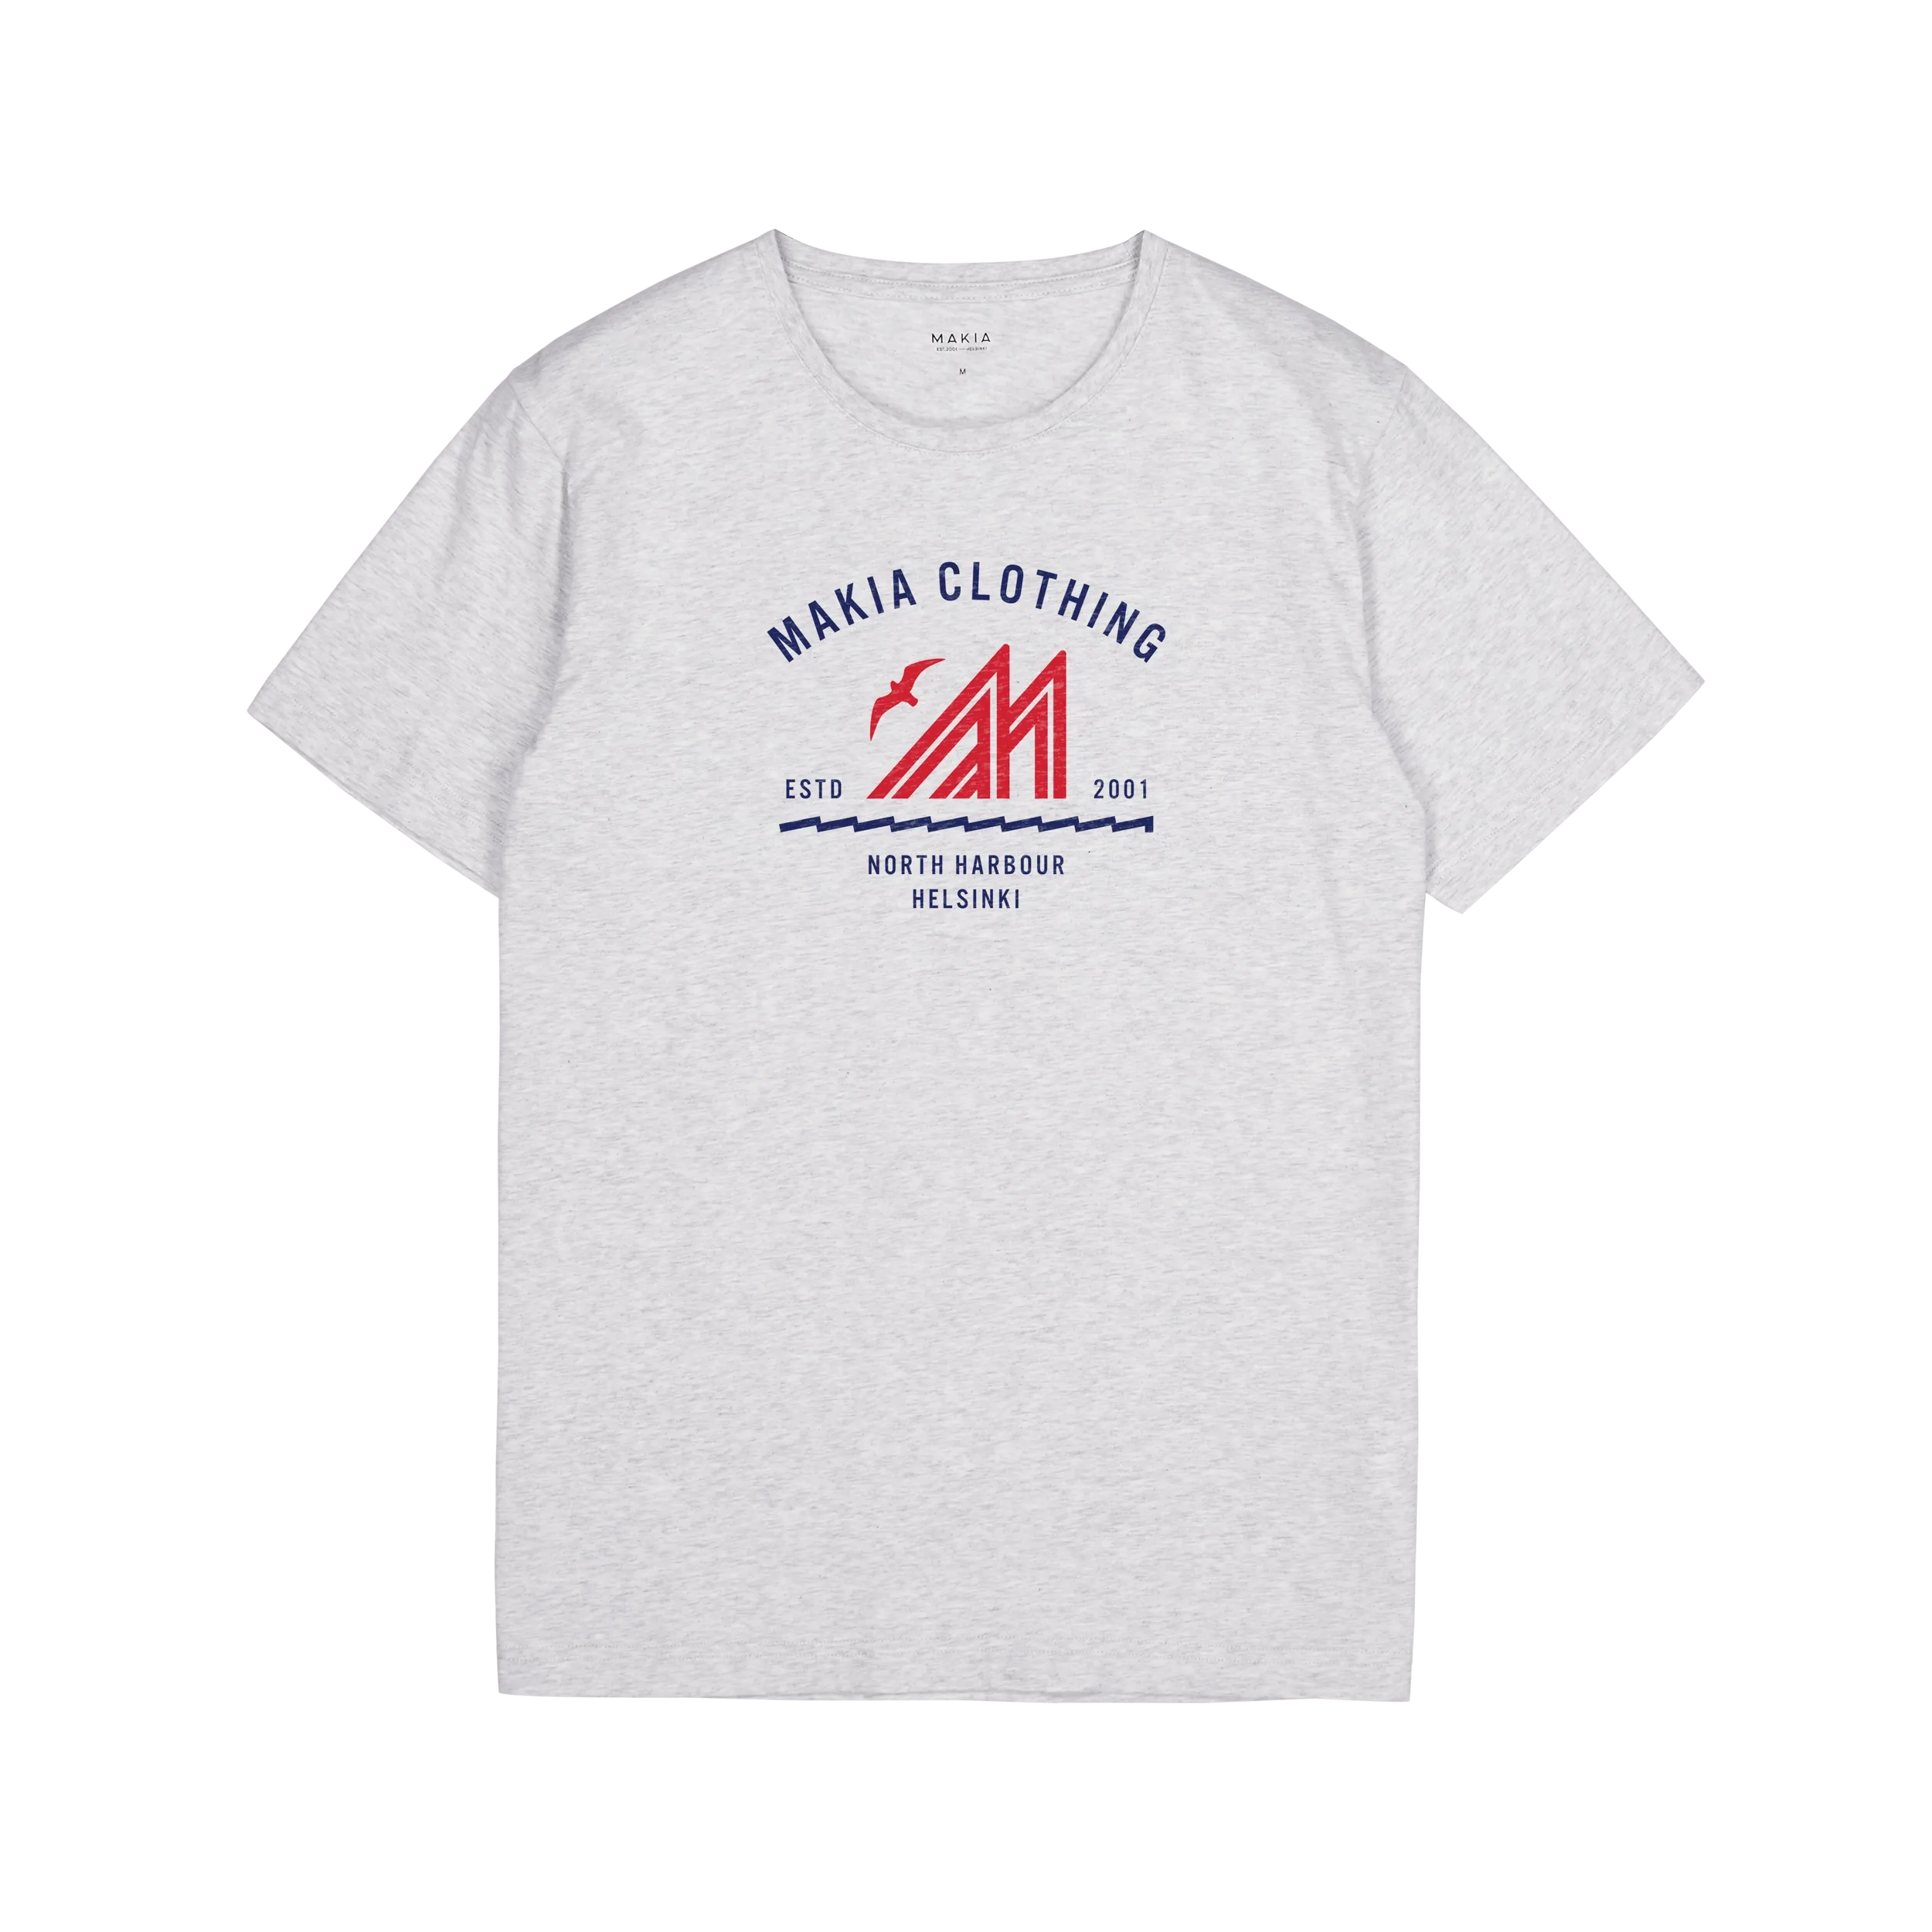 Light grey cotton t-shirt with red and navy and navy Merenkävijät print on chest